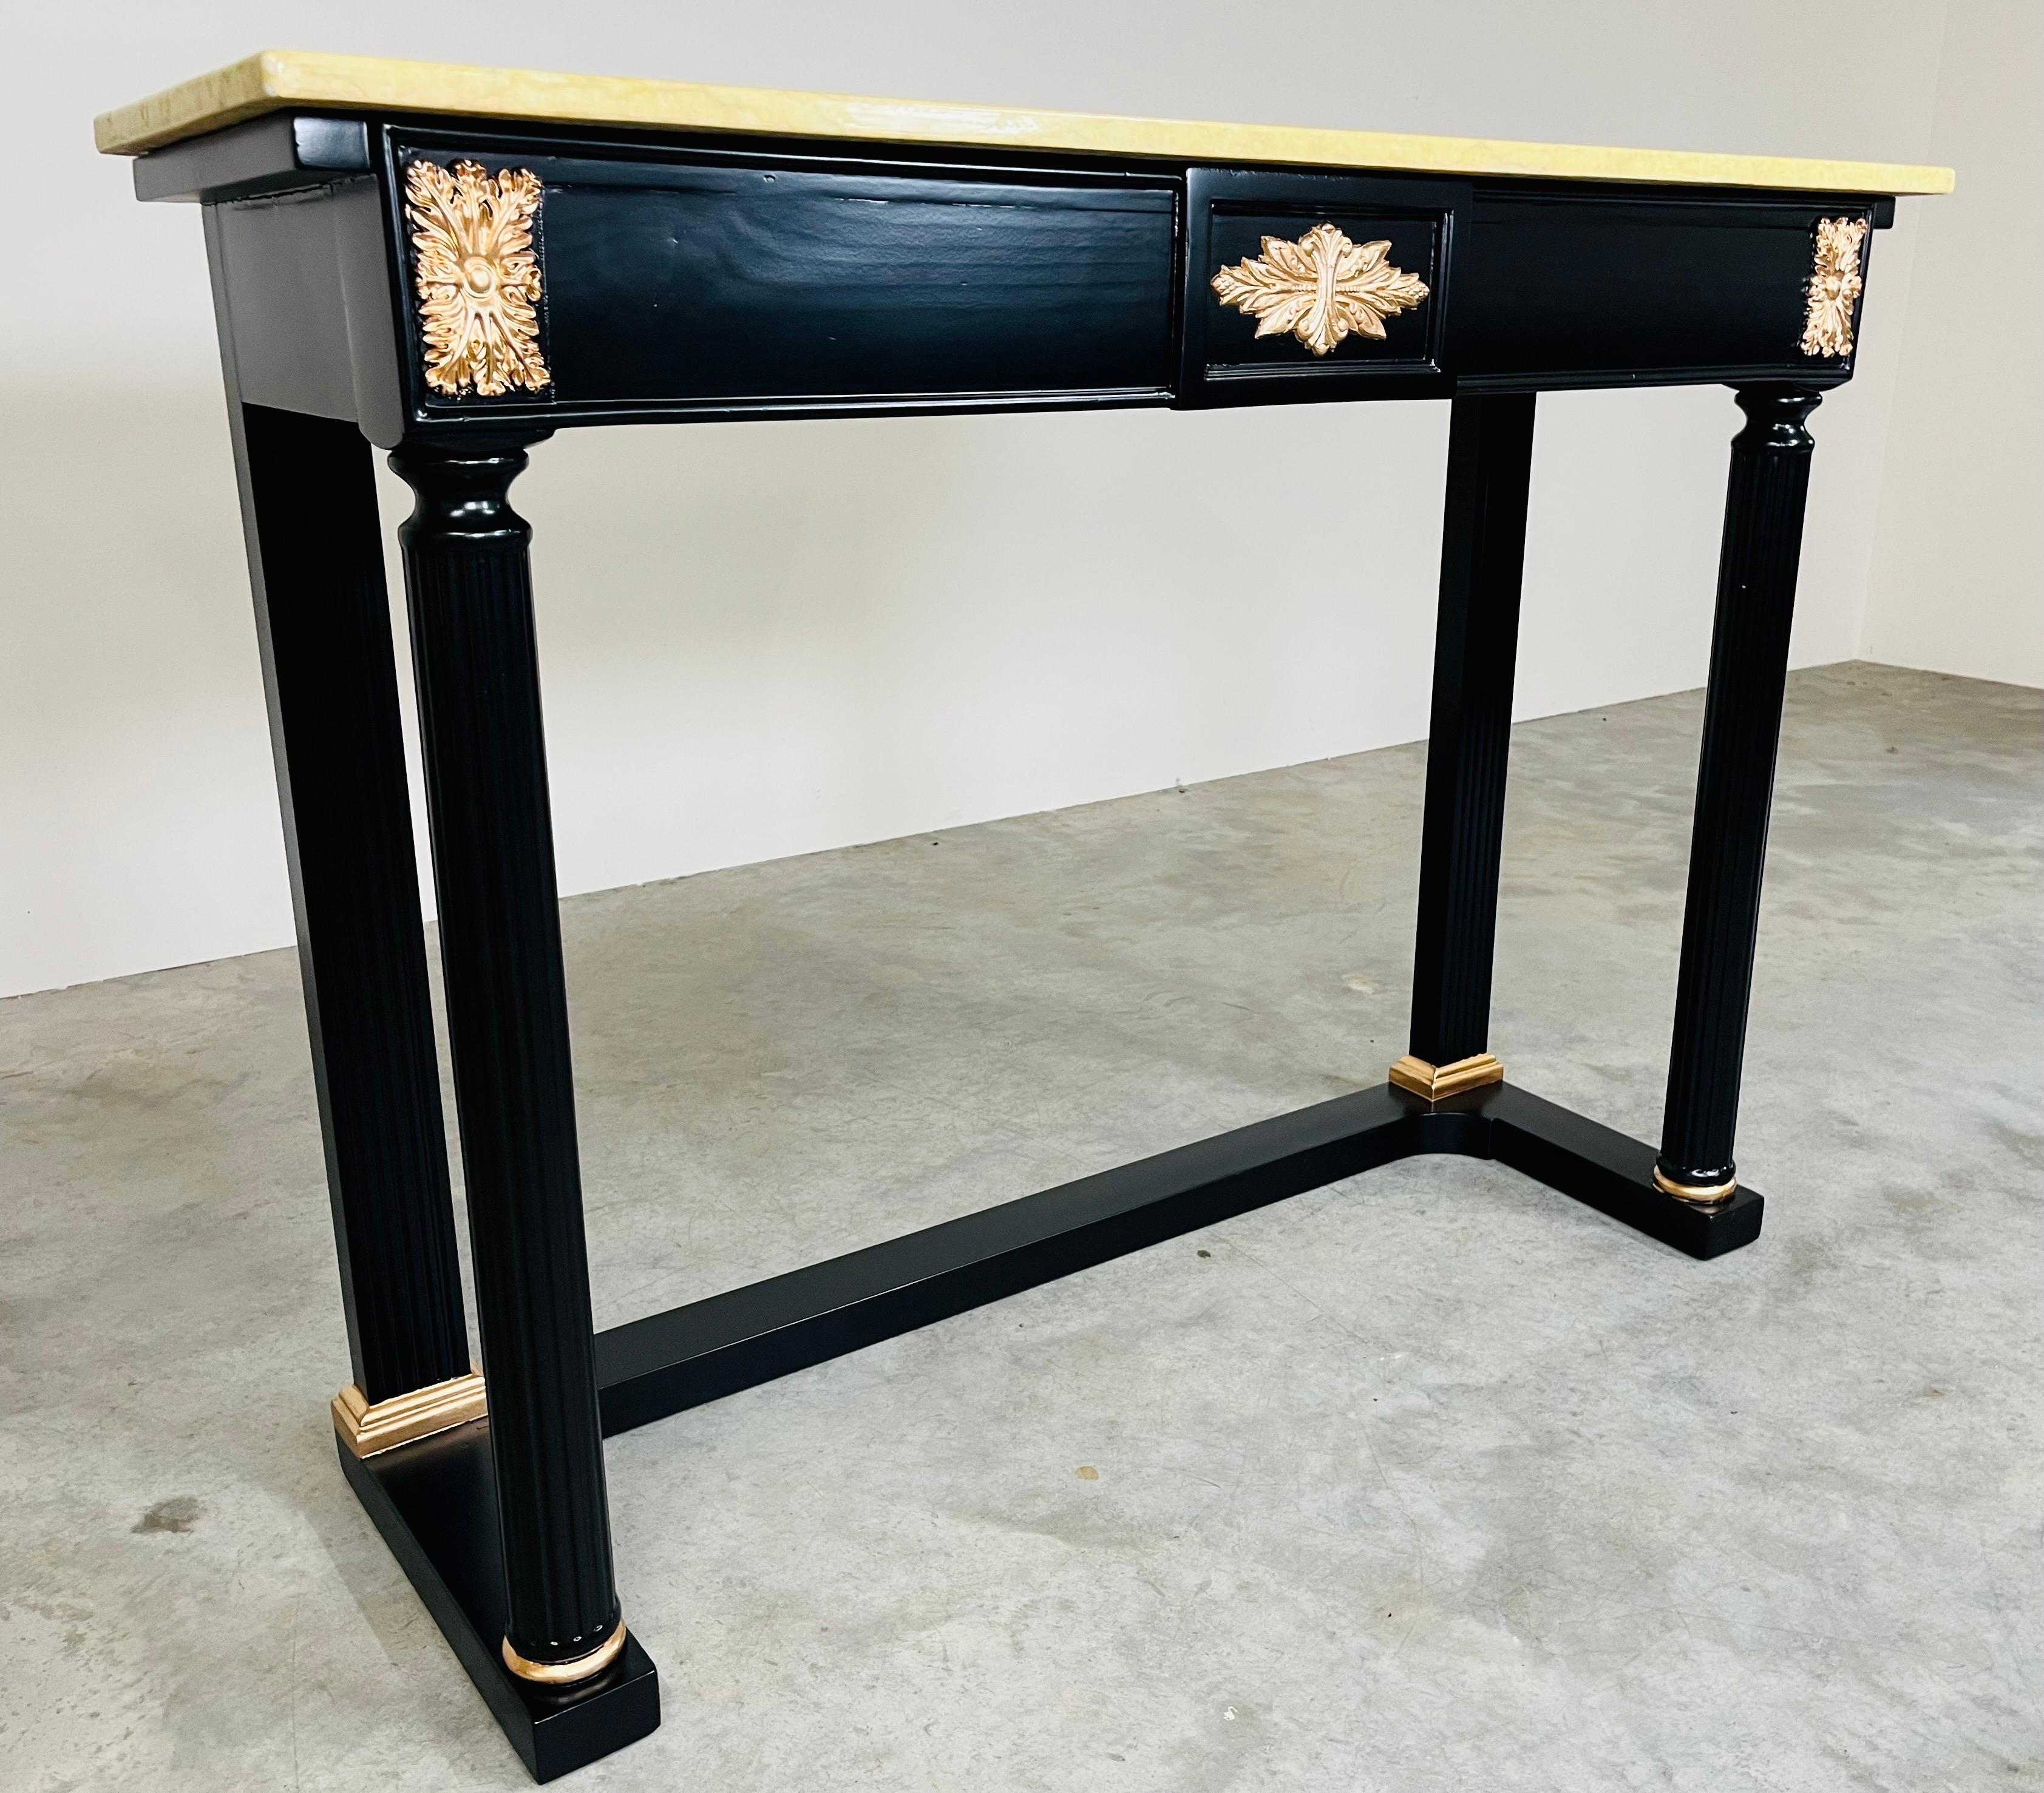 20th Century Louis XVI Maison Jansen Style Lacquered Marble Top Console or Entryway Table For Sale